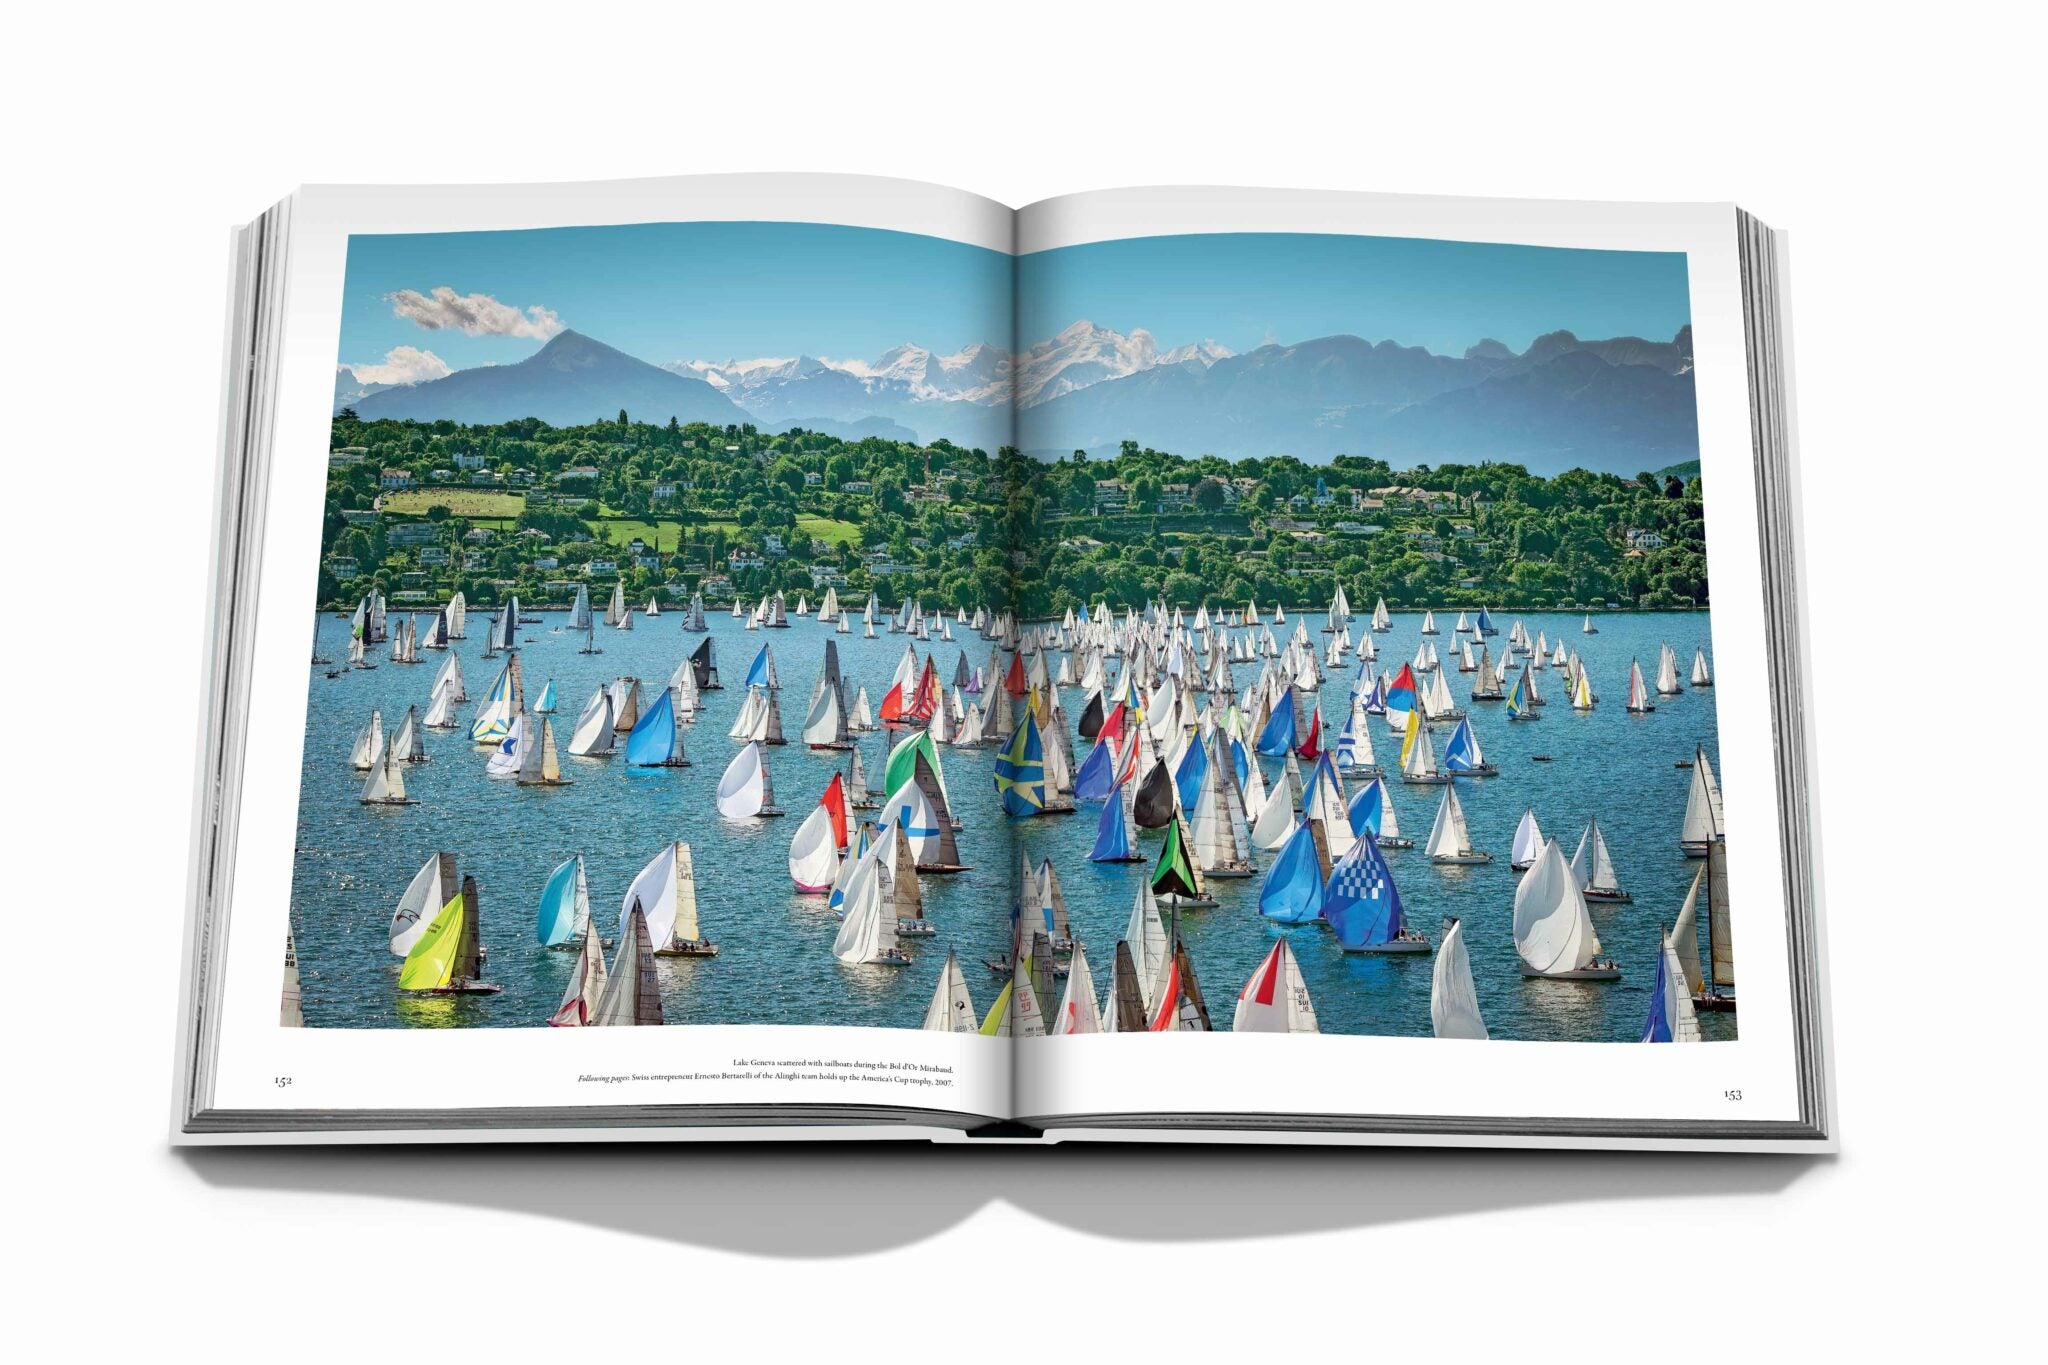 Assouline Geneva: At The Heart Of The World